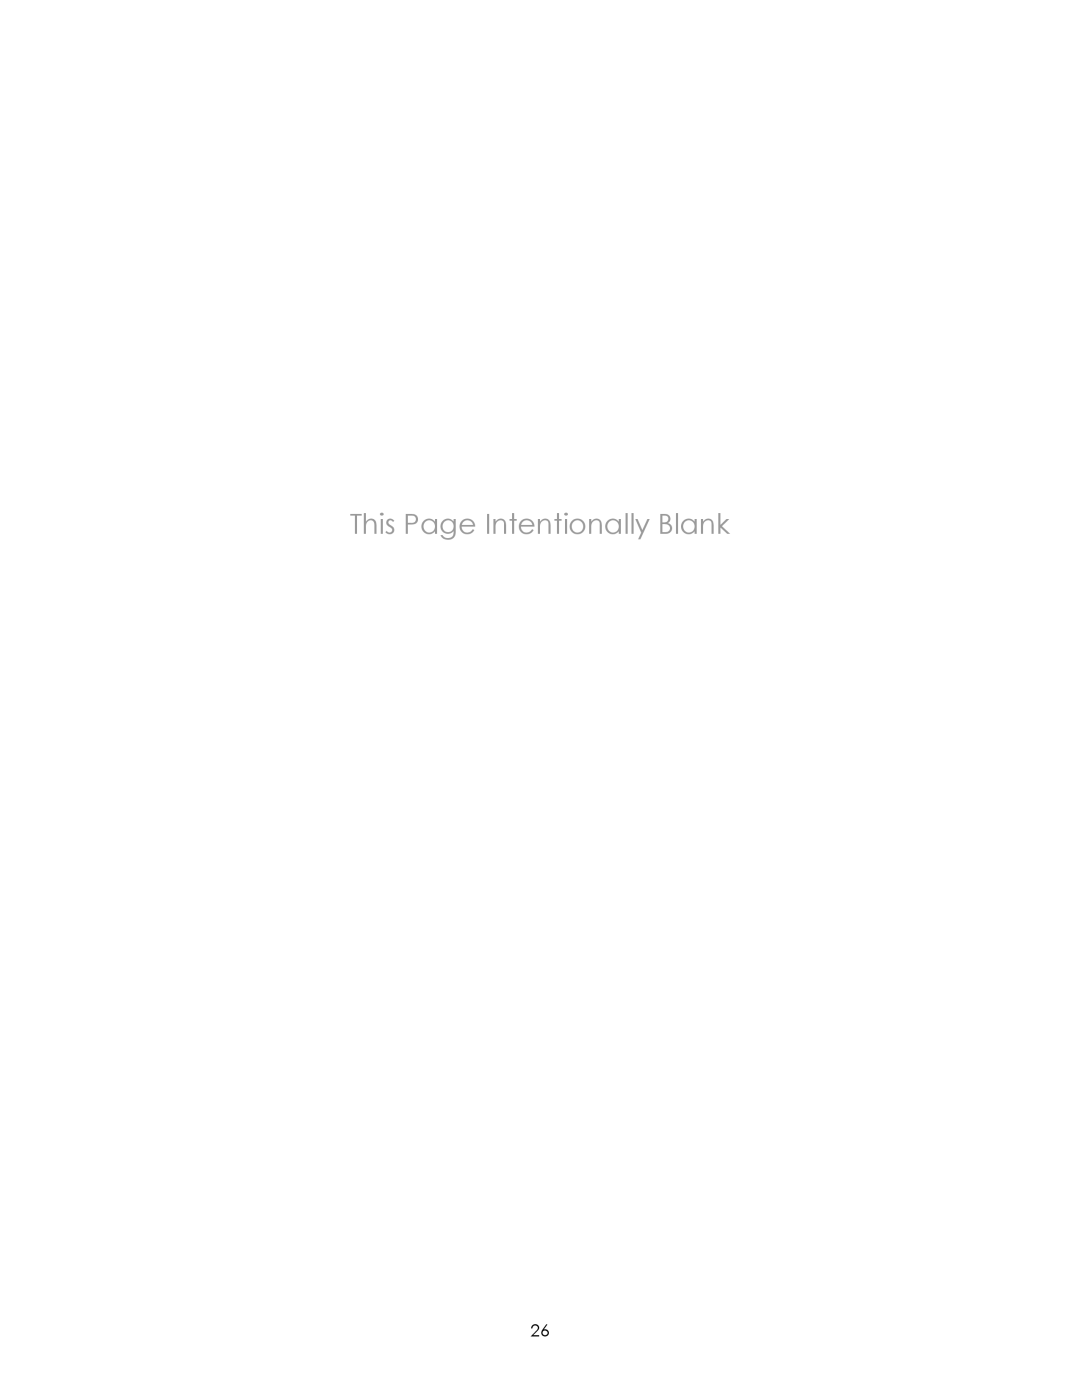 York Version 1.5.0 manual This Page Intentionally Blank 